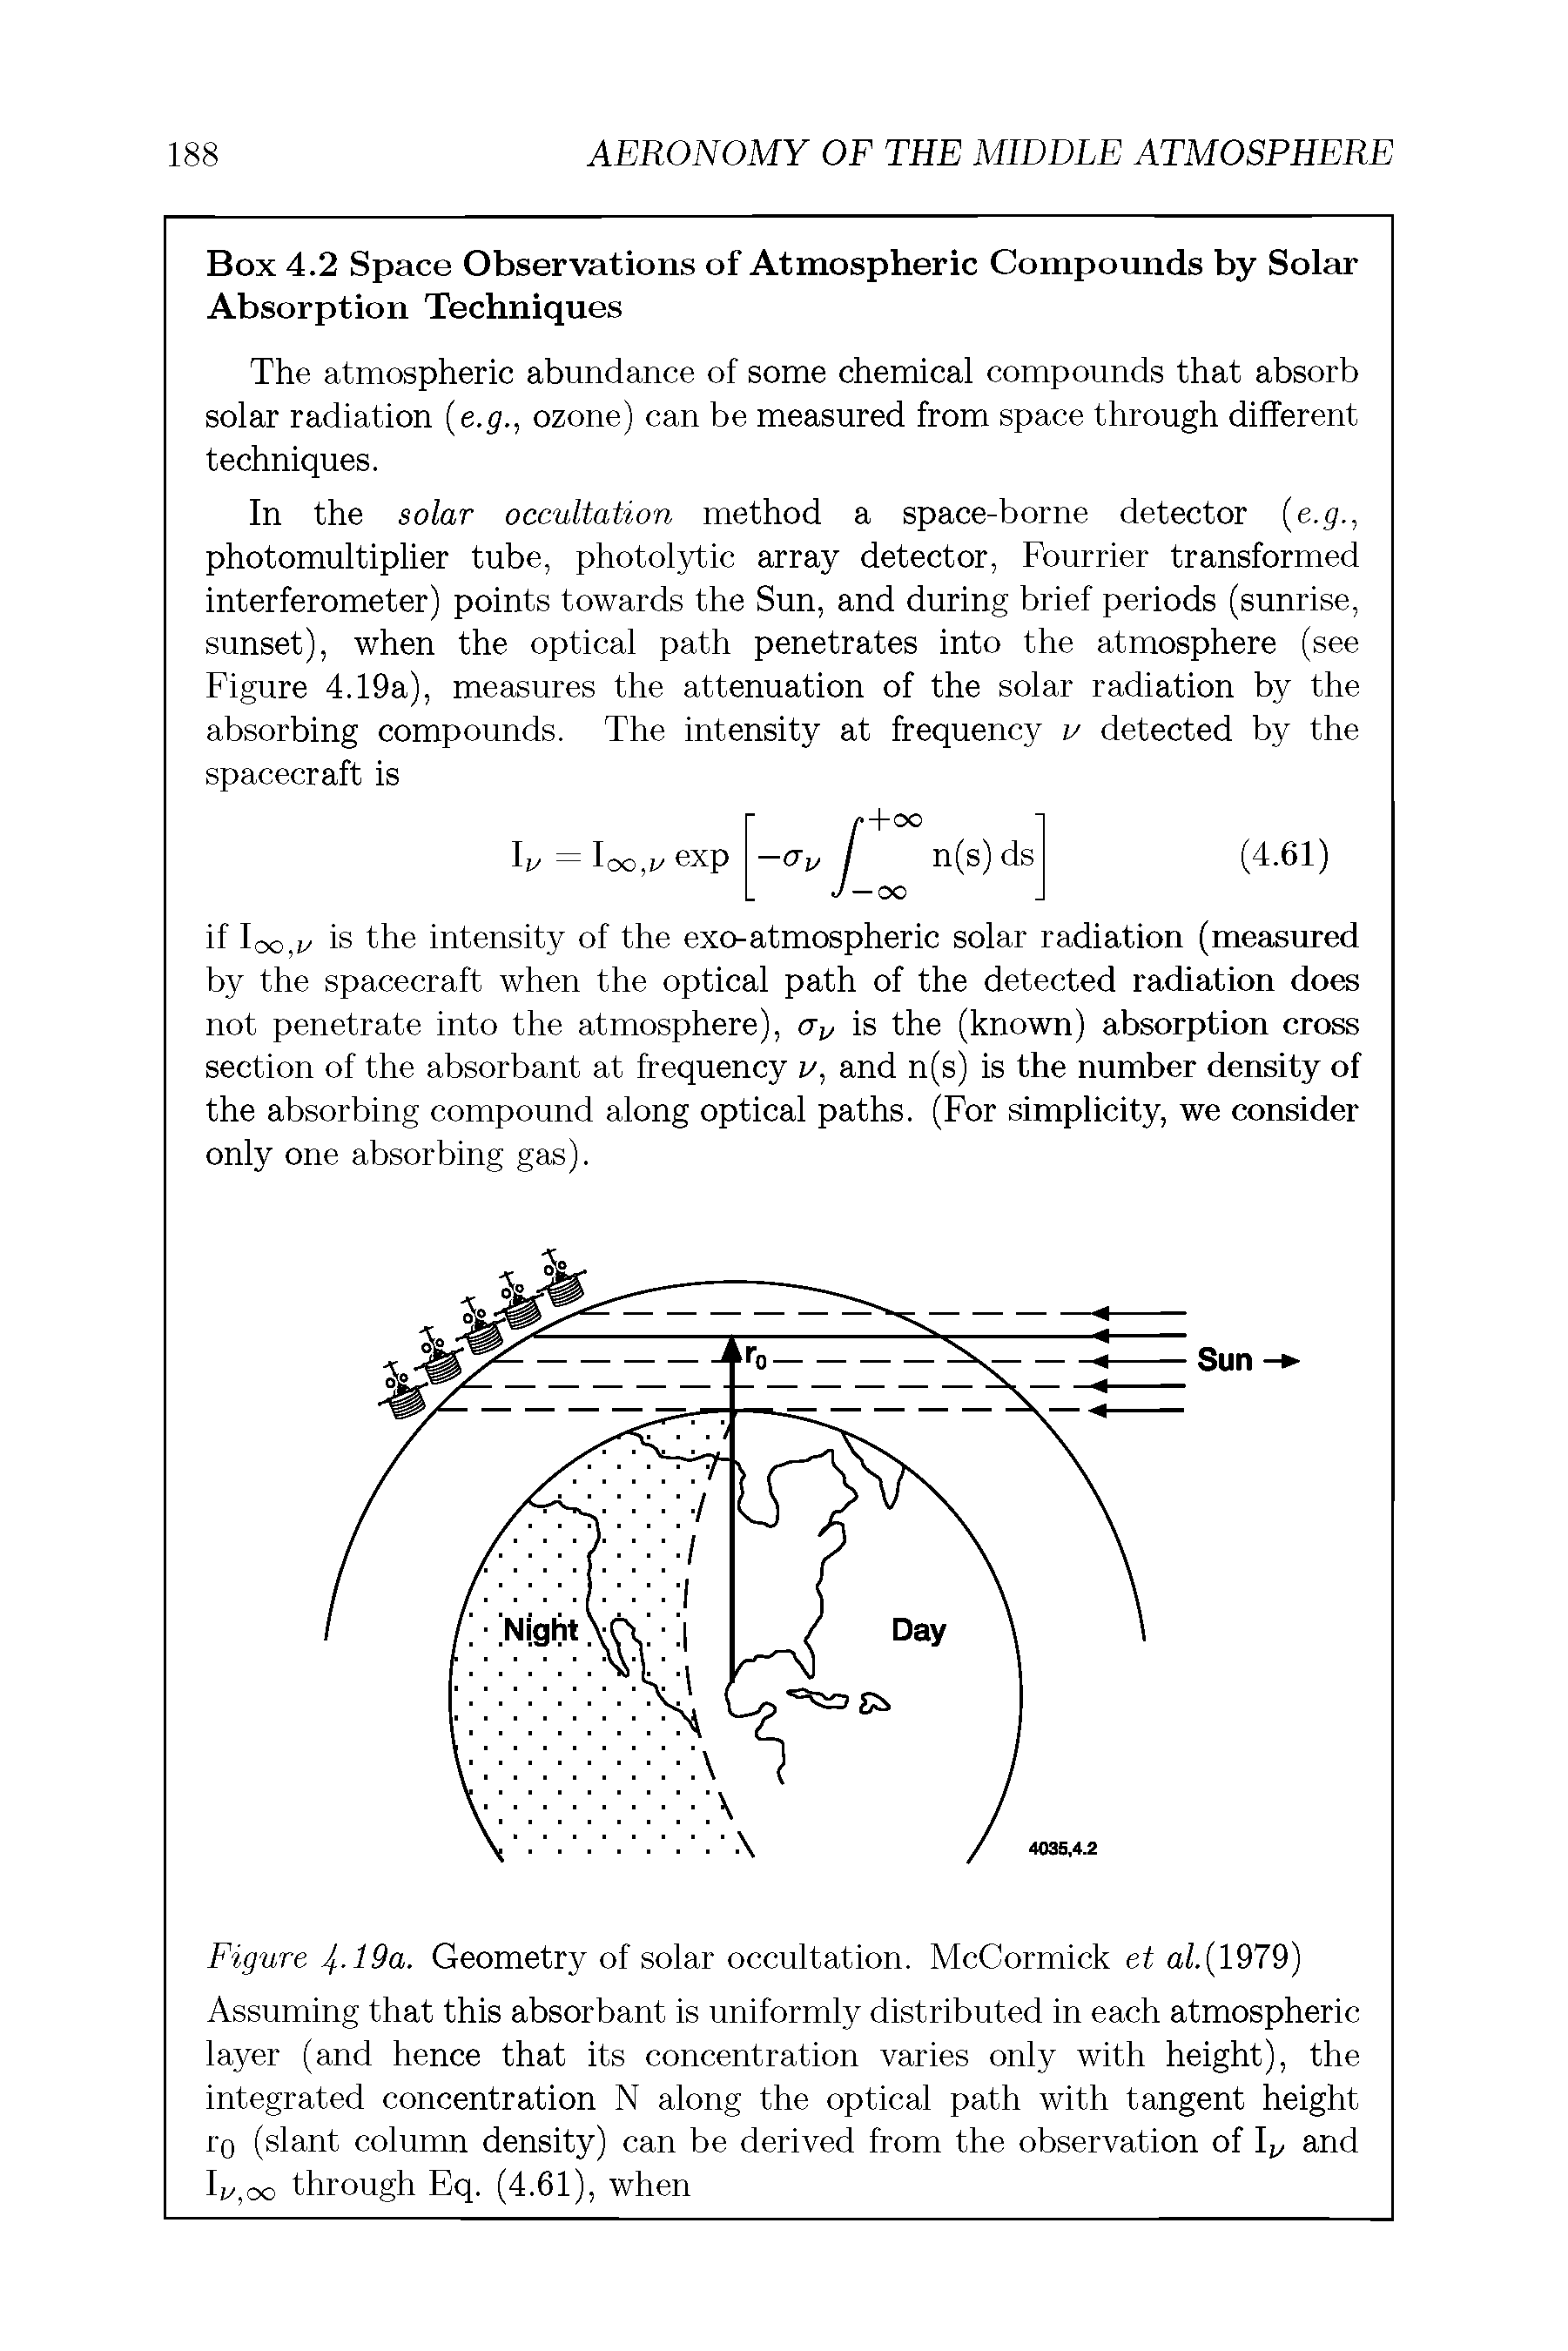 Figure 4..19a. Geometry of solar occultation. McCormick et aZ.(1979) Assuming that this absorbant is uniformly distributed in each atmospheric layer (and hence that its concentration varies only with height), the integrated concentration N along the optical path with tangent height i 0 (slant column density) can be derived from the observation of lu and Iv,00 through Eq. (4.61), when...